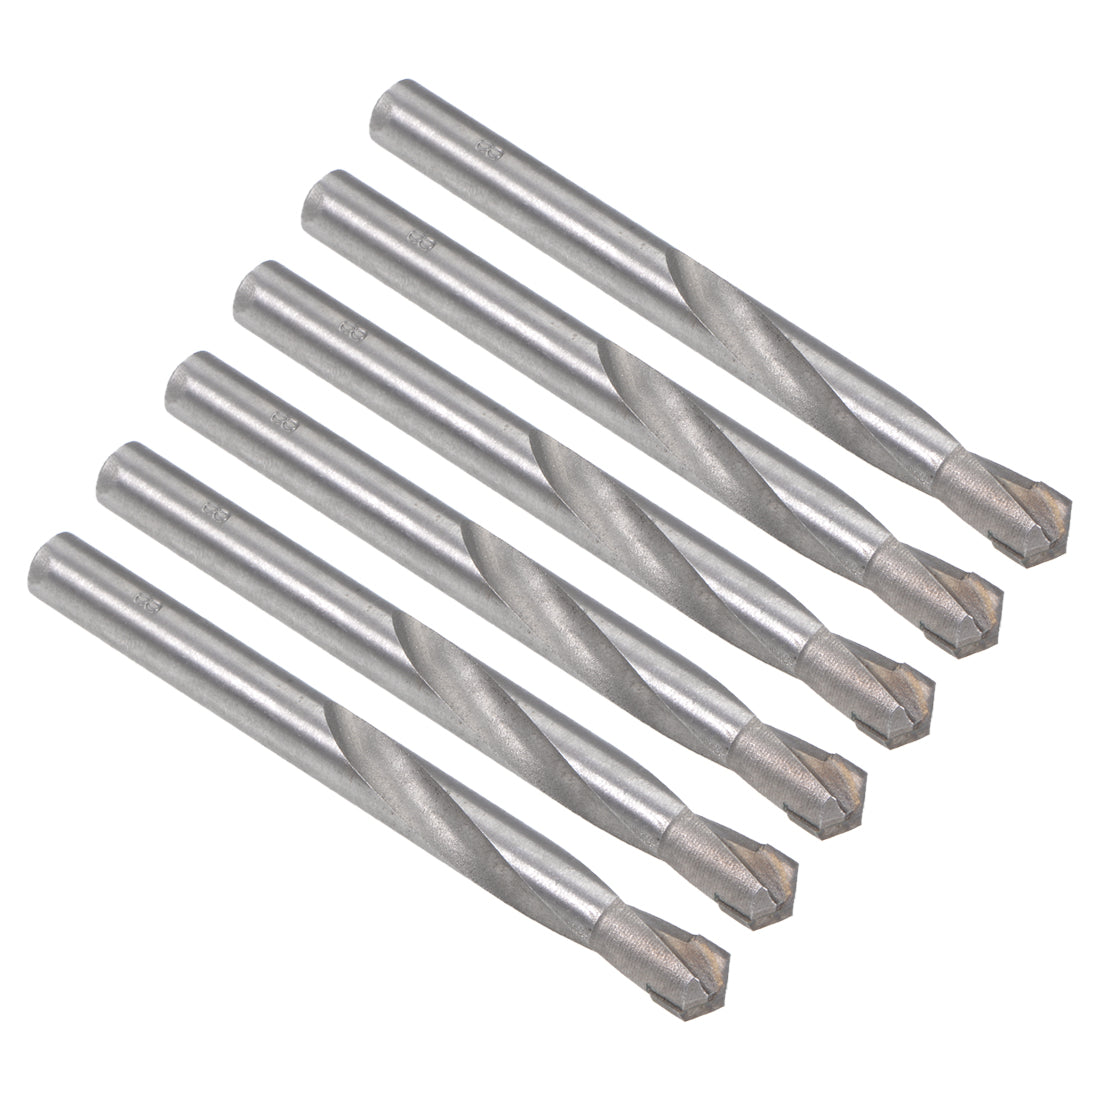 uxcell Uxcell 8mm Cemented Carbide Twist Drill Bits for Stainless Steel Copper Aluminum 6 Pcs